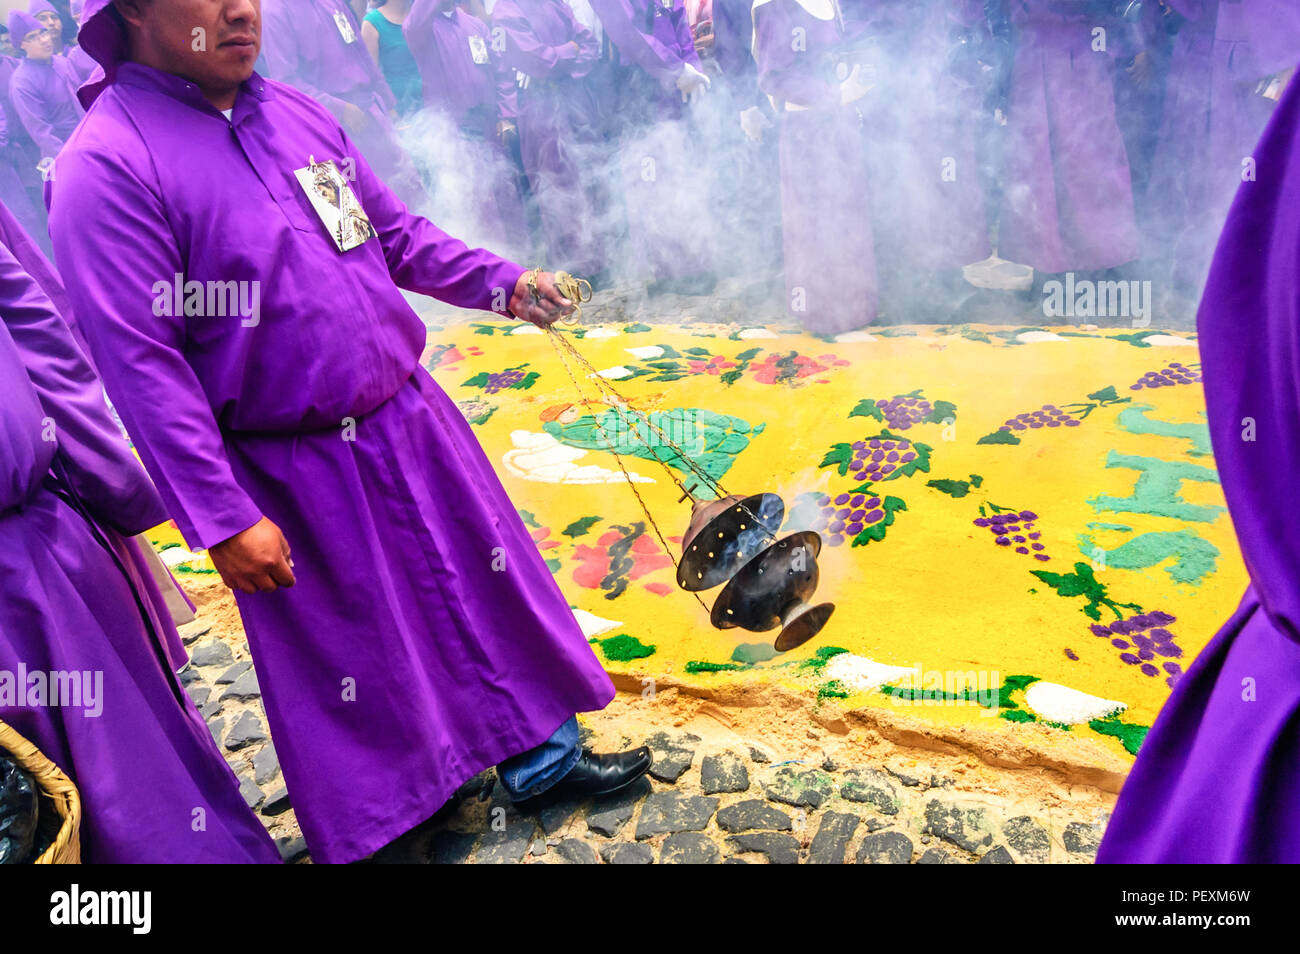 Antigua, Guatemala - March 15, 2015: Lent procession in UNESCO World Heritage Site with most famous Holy Week celebrations in Latin America. Stock Photo